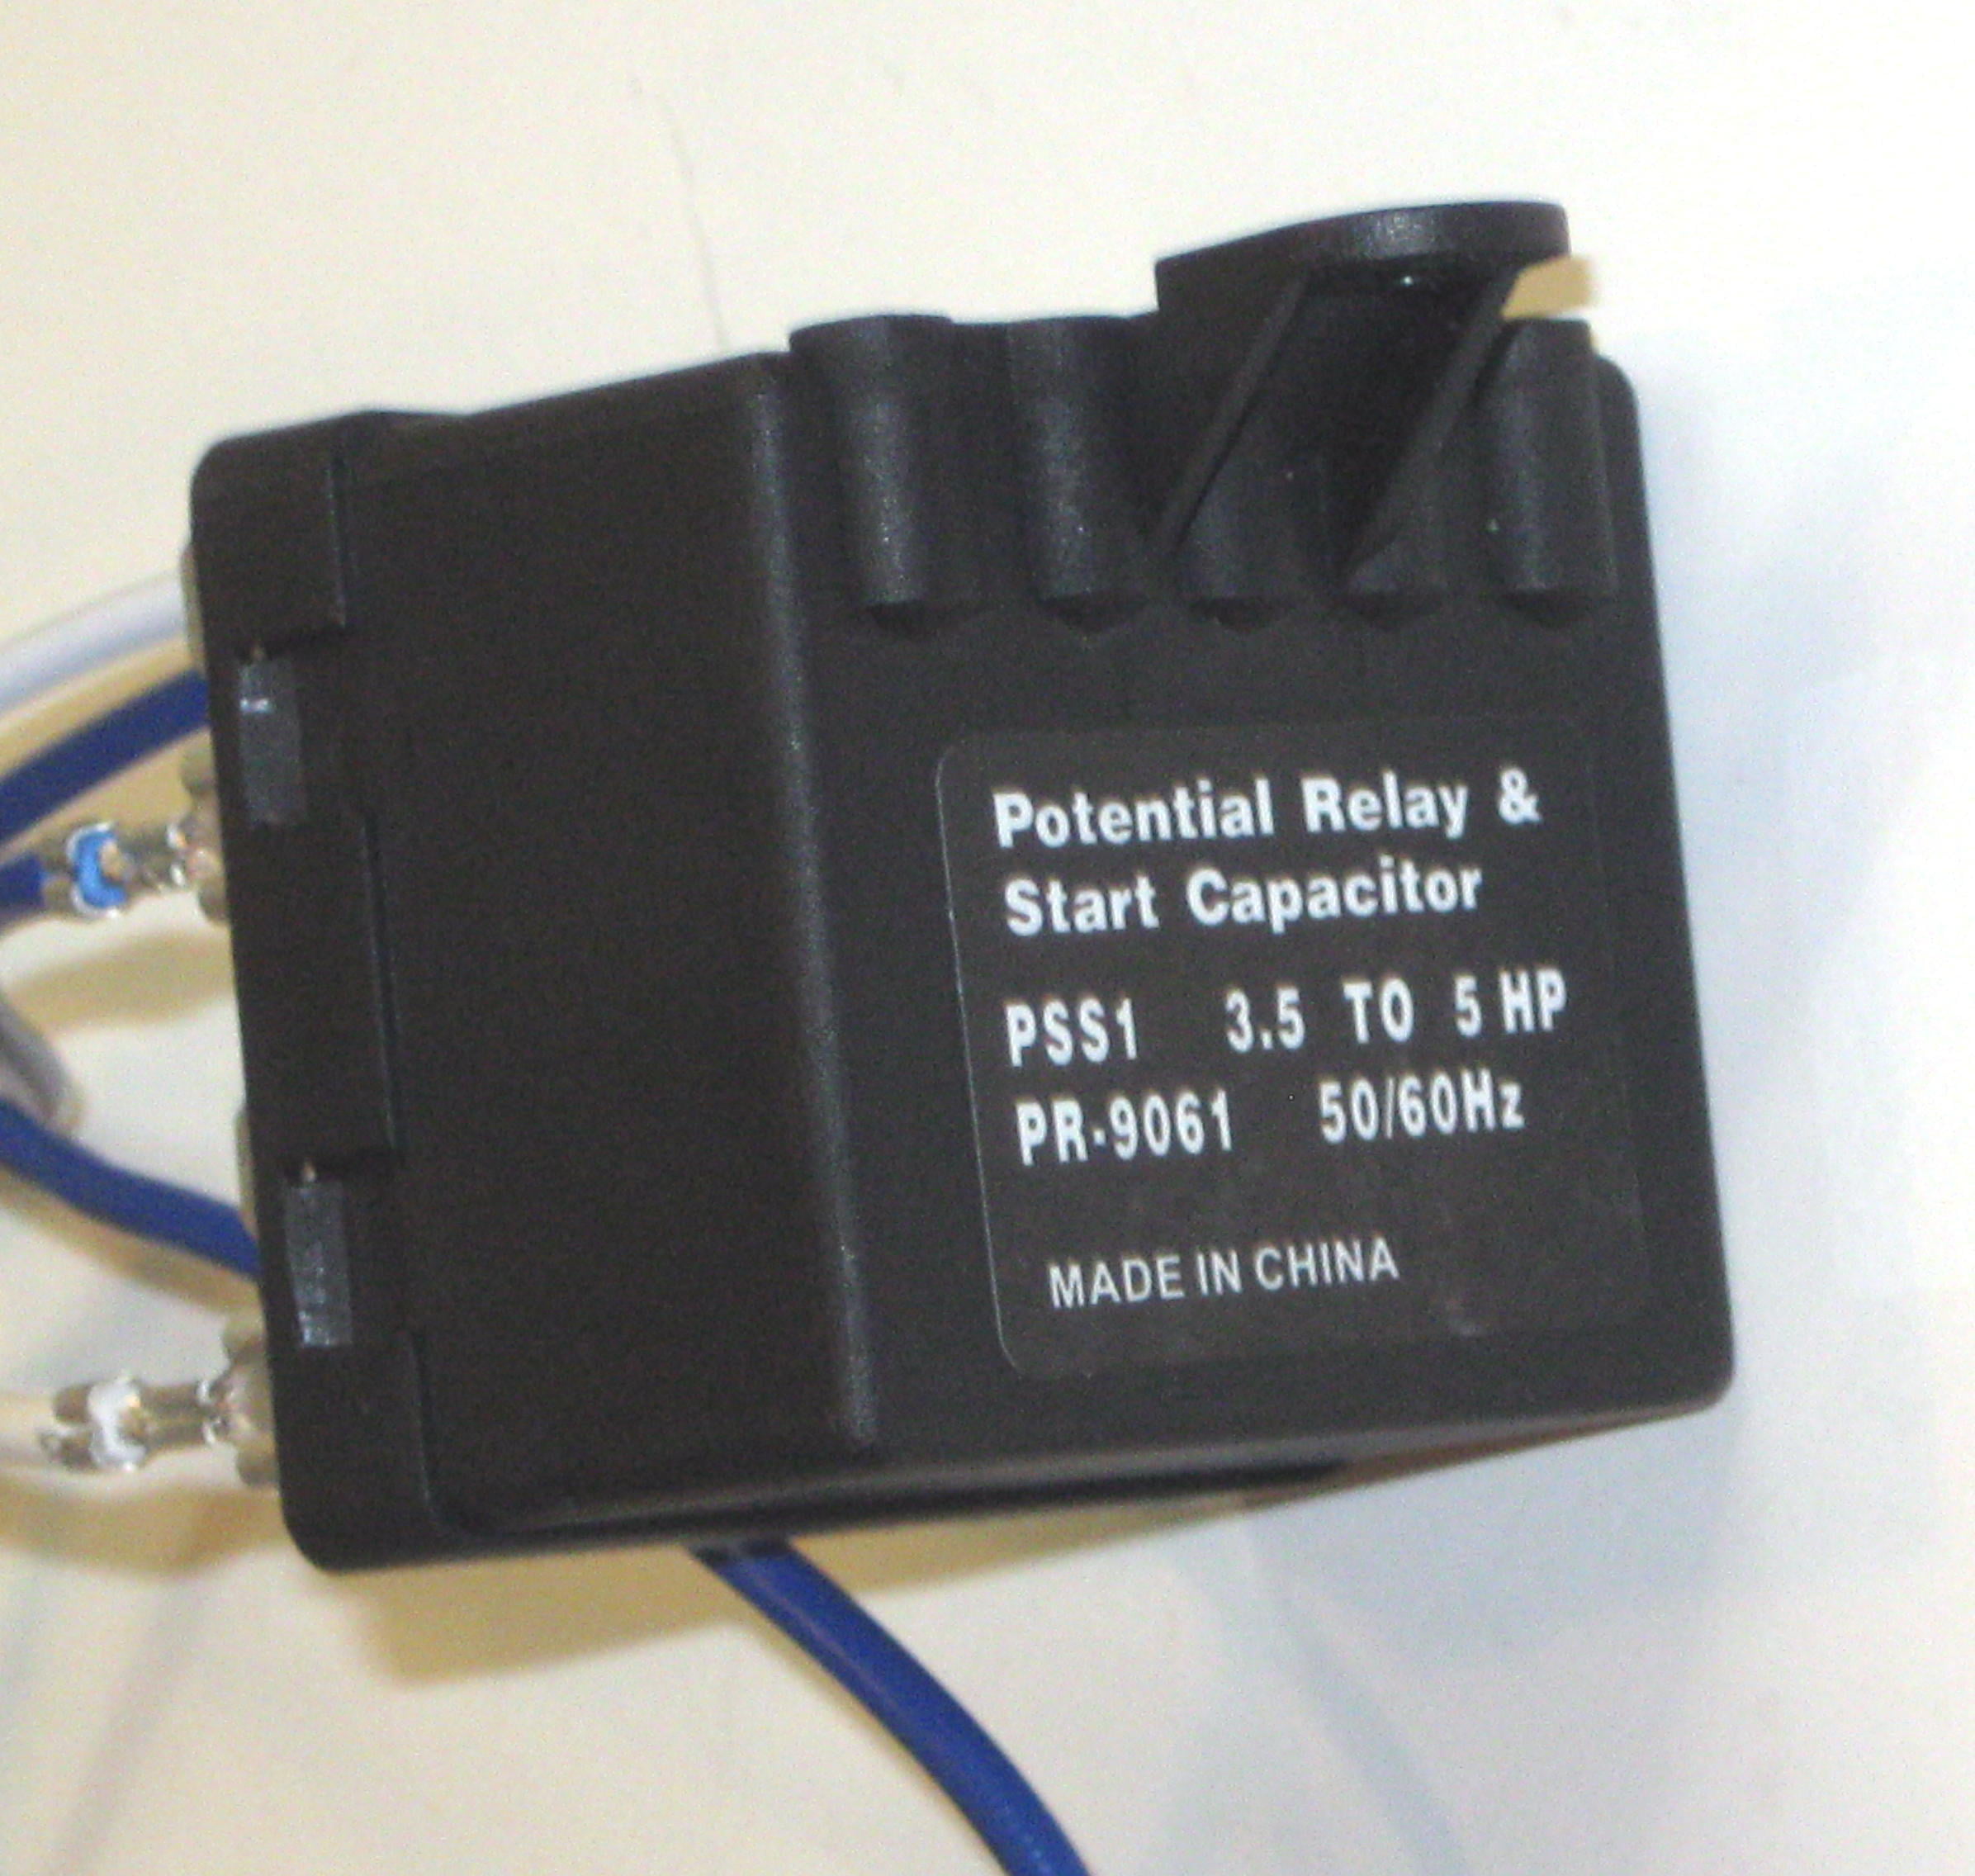 HVAC Air Conditioning Super Torque Kick Start Potential Relay & Capacitor PSS5 for sale online 